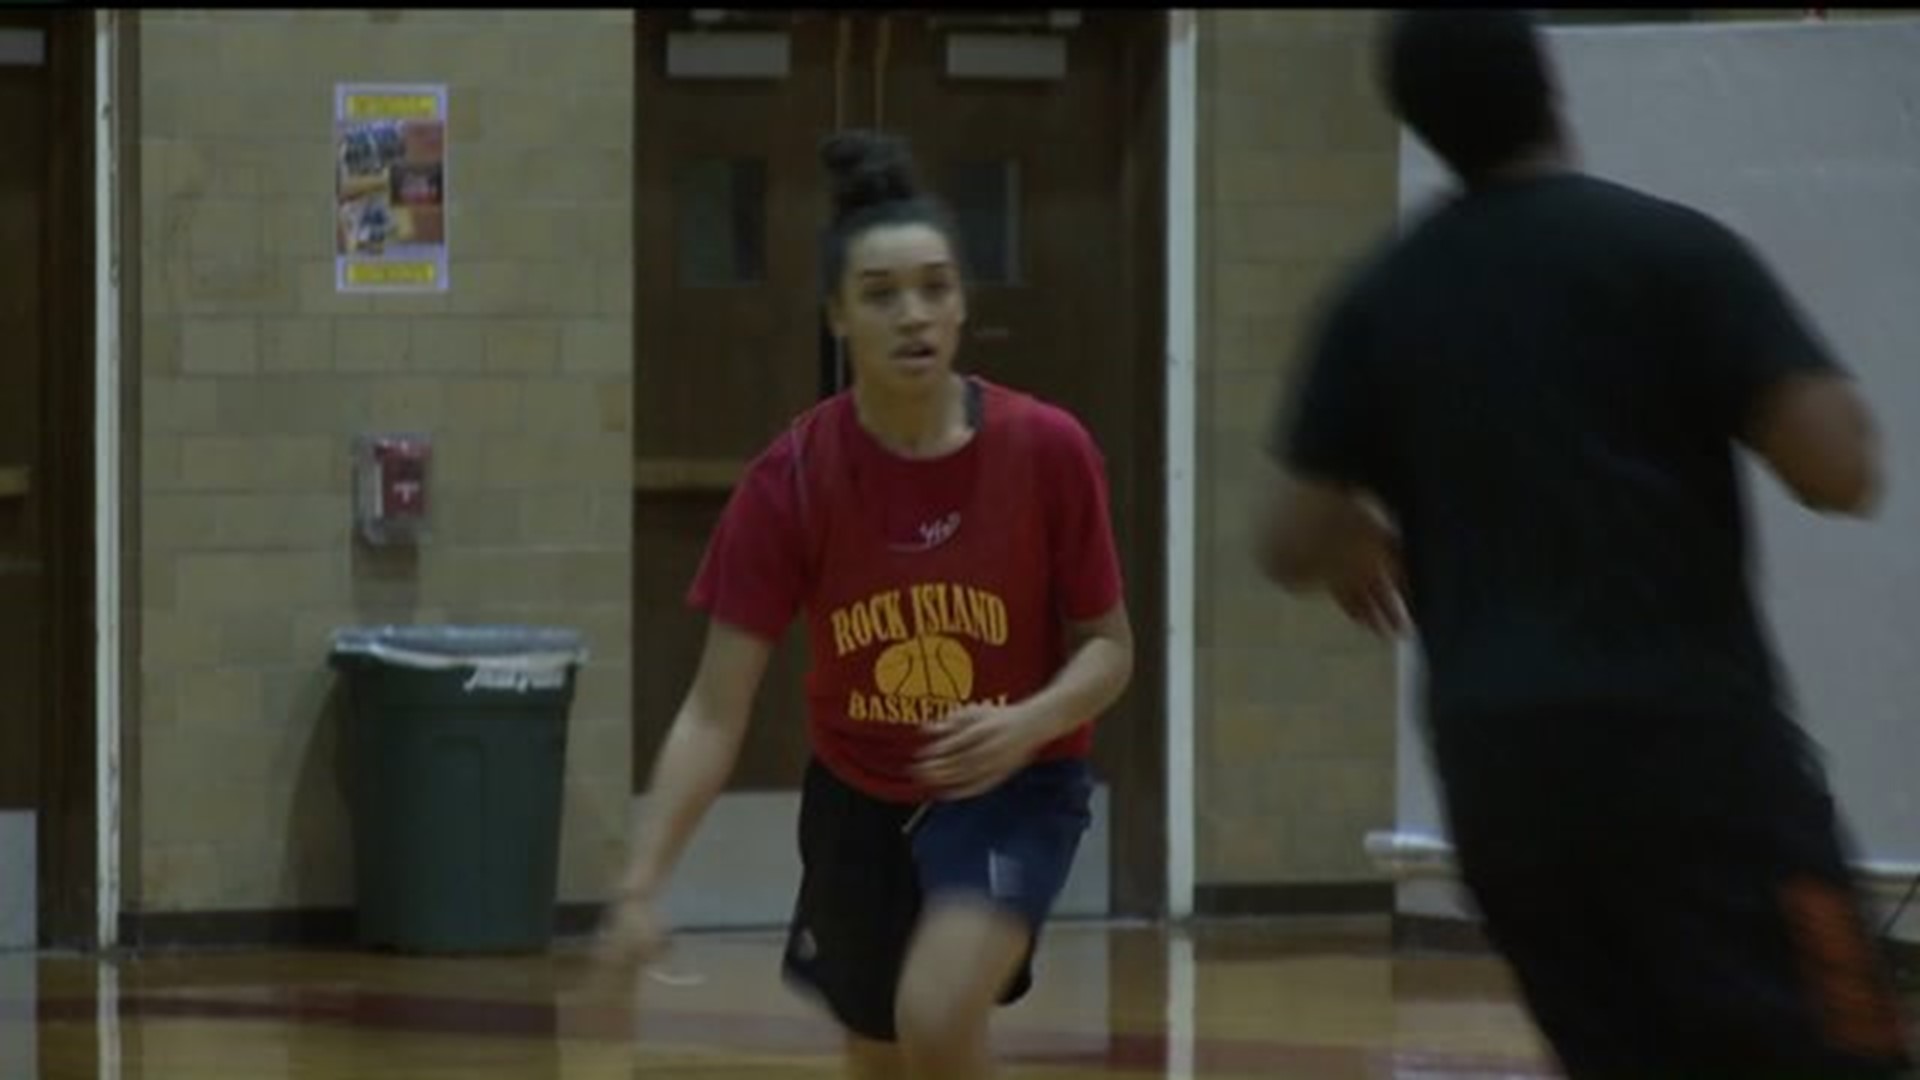 Rock Island GBB off to undefeated start